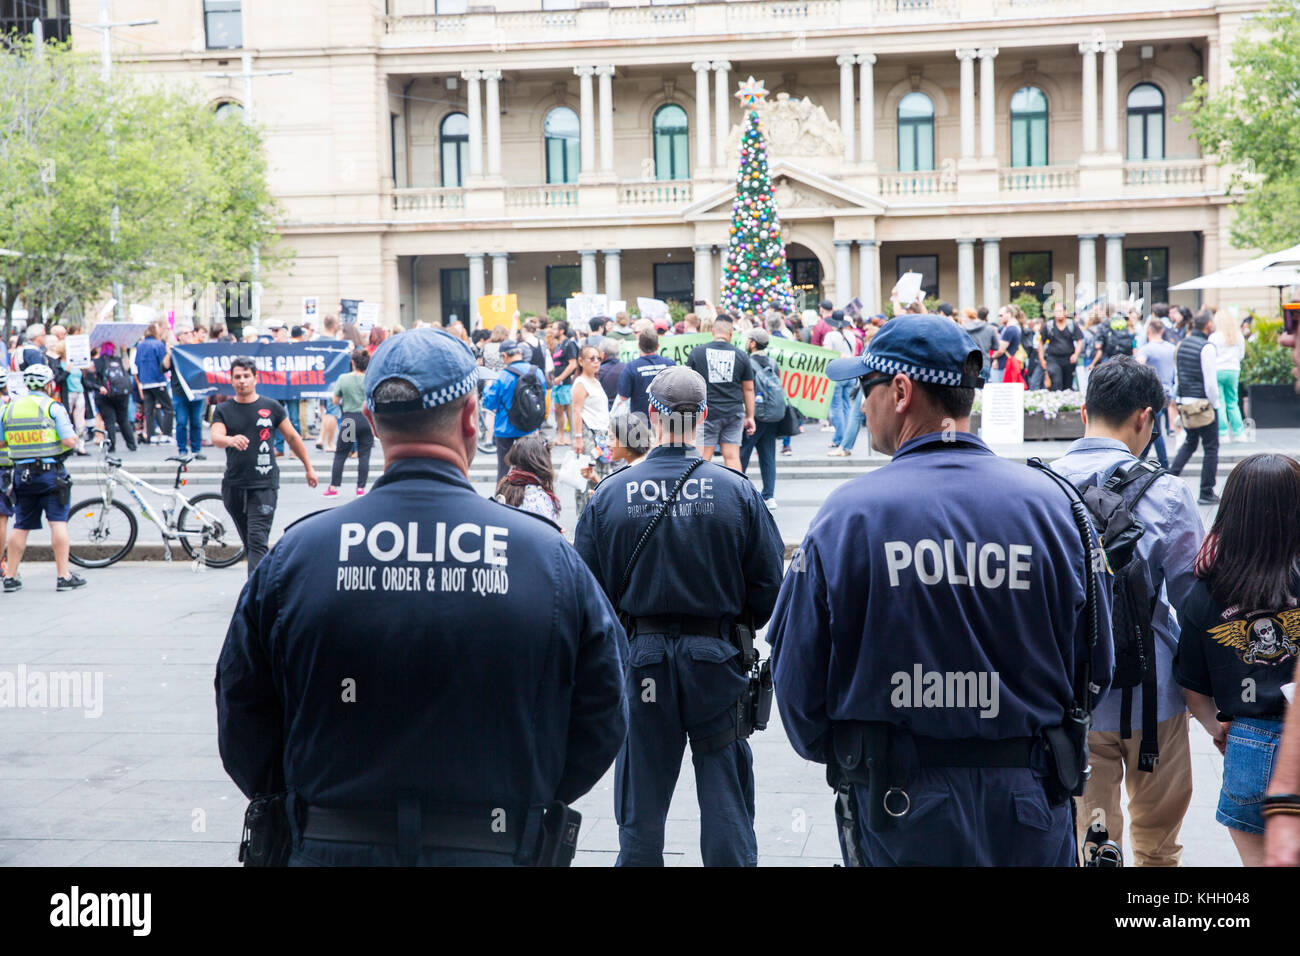 Sydney, Australia.Saturday 18th November 2017. The Refugee Action Colation hold a protest in Circular Quay Sydney seeking the Australian Government to settle refugees in Australia. The New South Wales Police Public Order and Riot squad watch over proceedings. Credit: martin berry/Alamy Live News Stock Photo